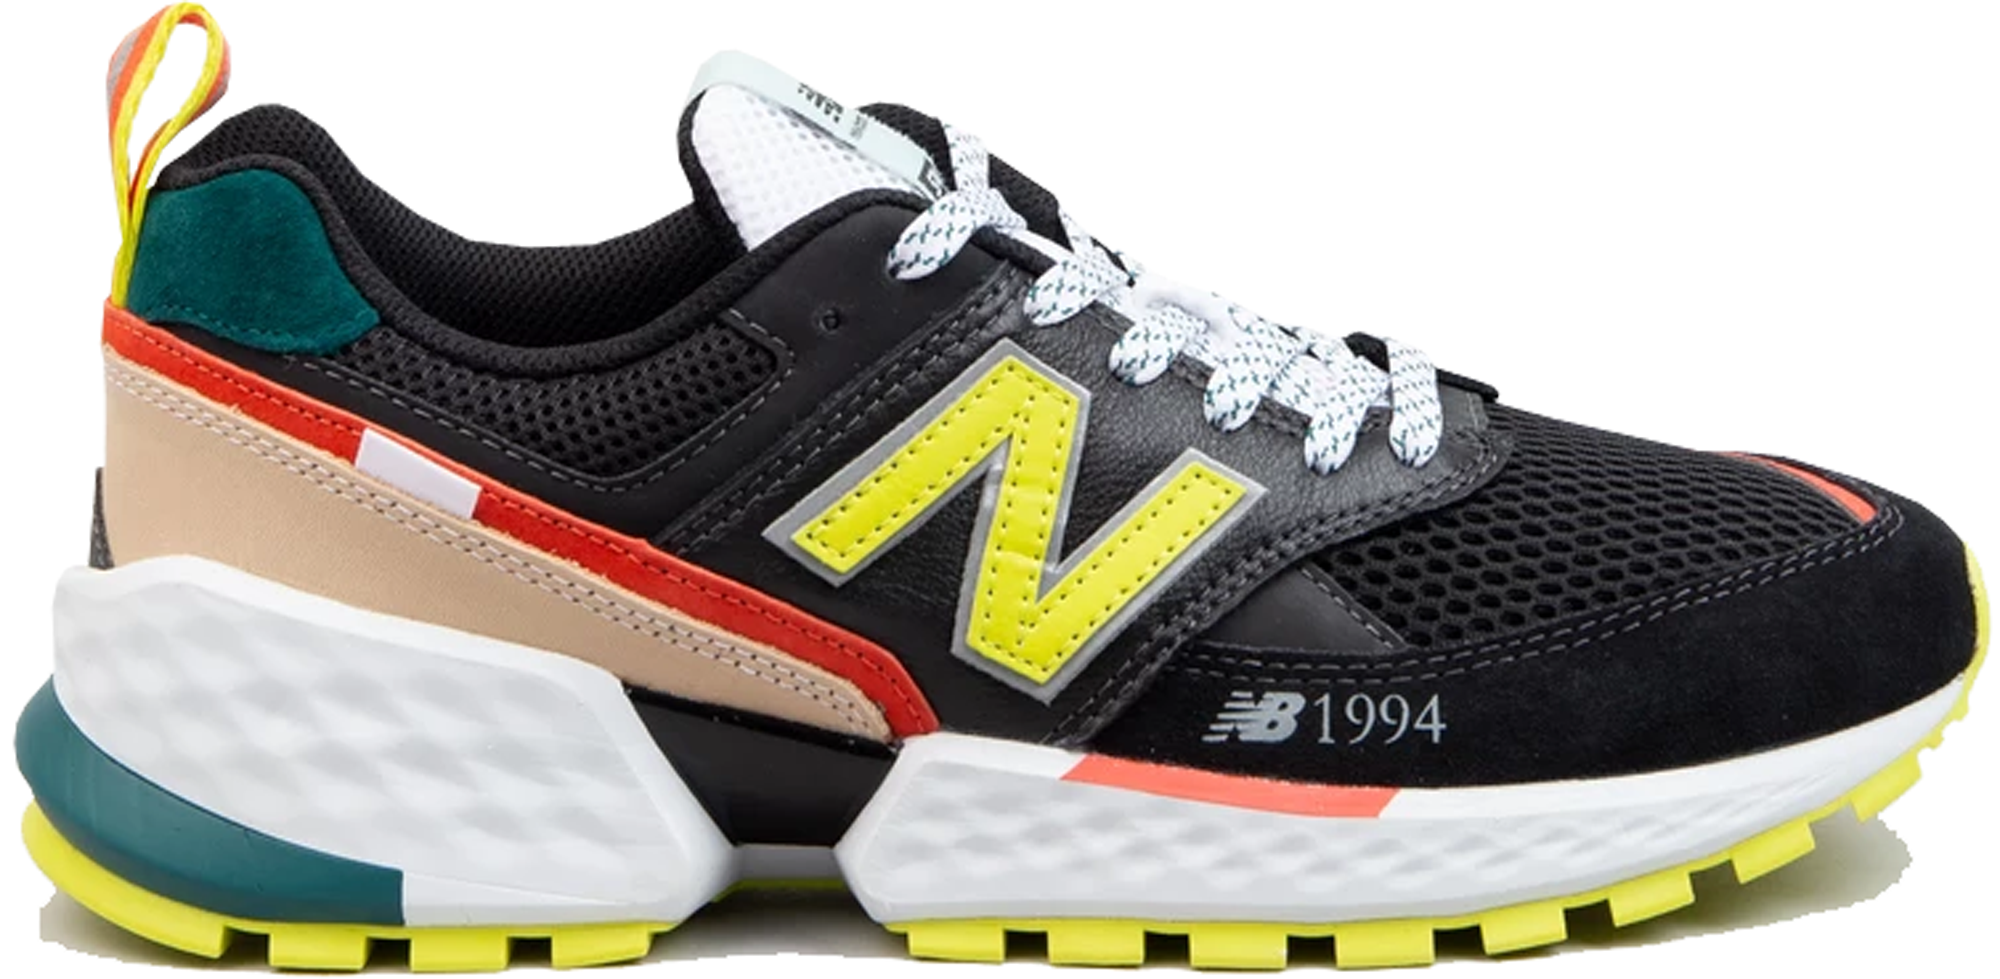 new balance outdoor collection